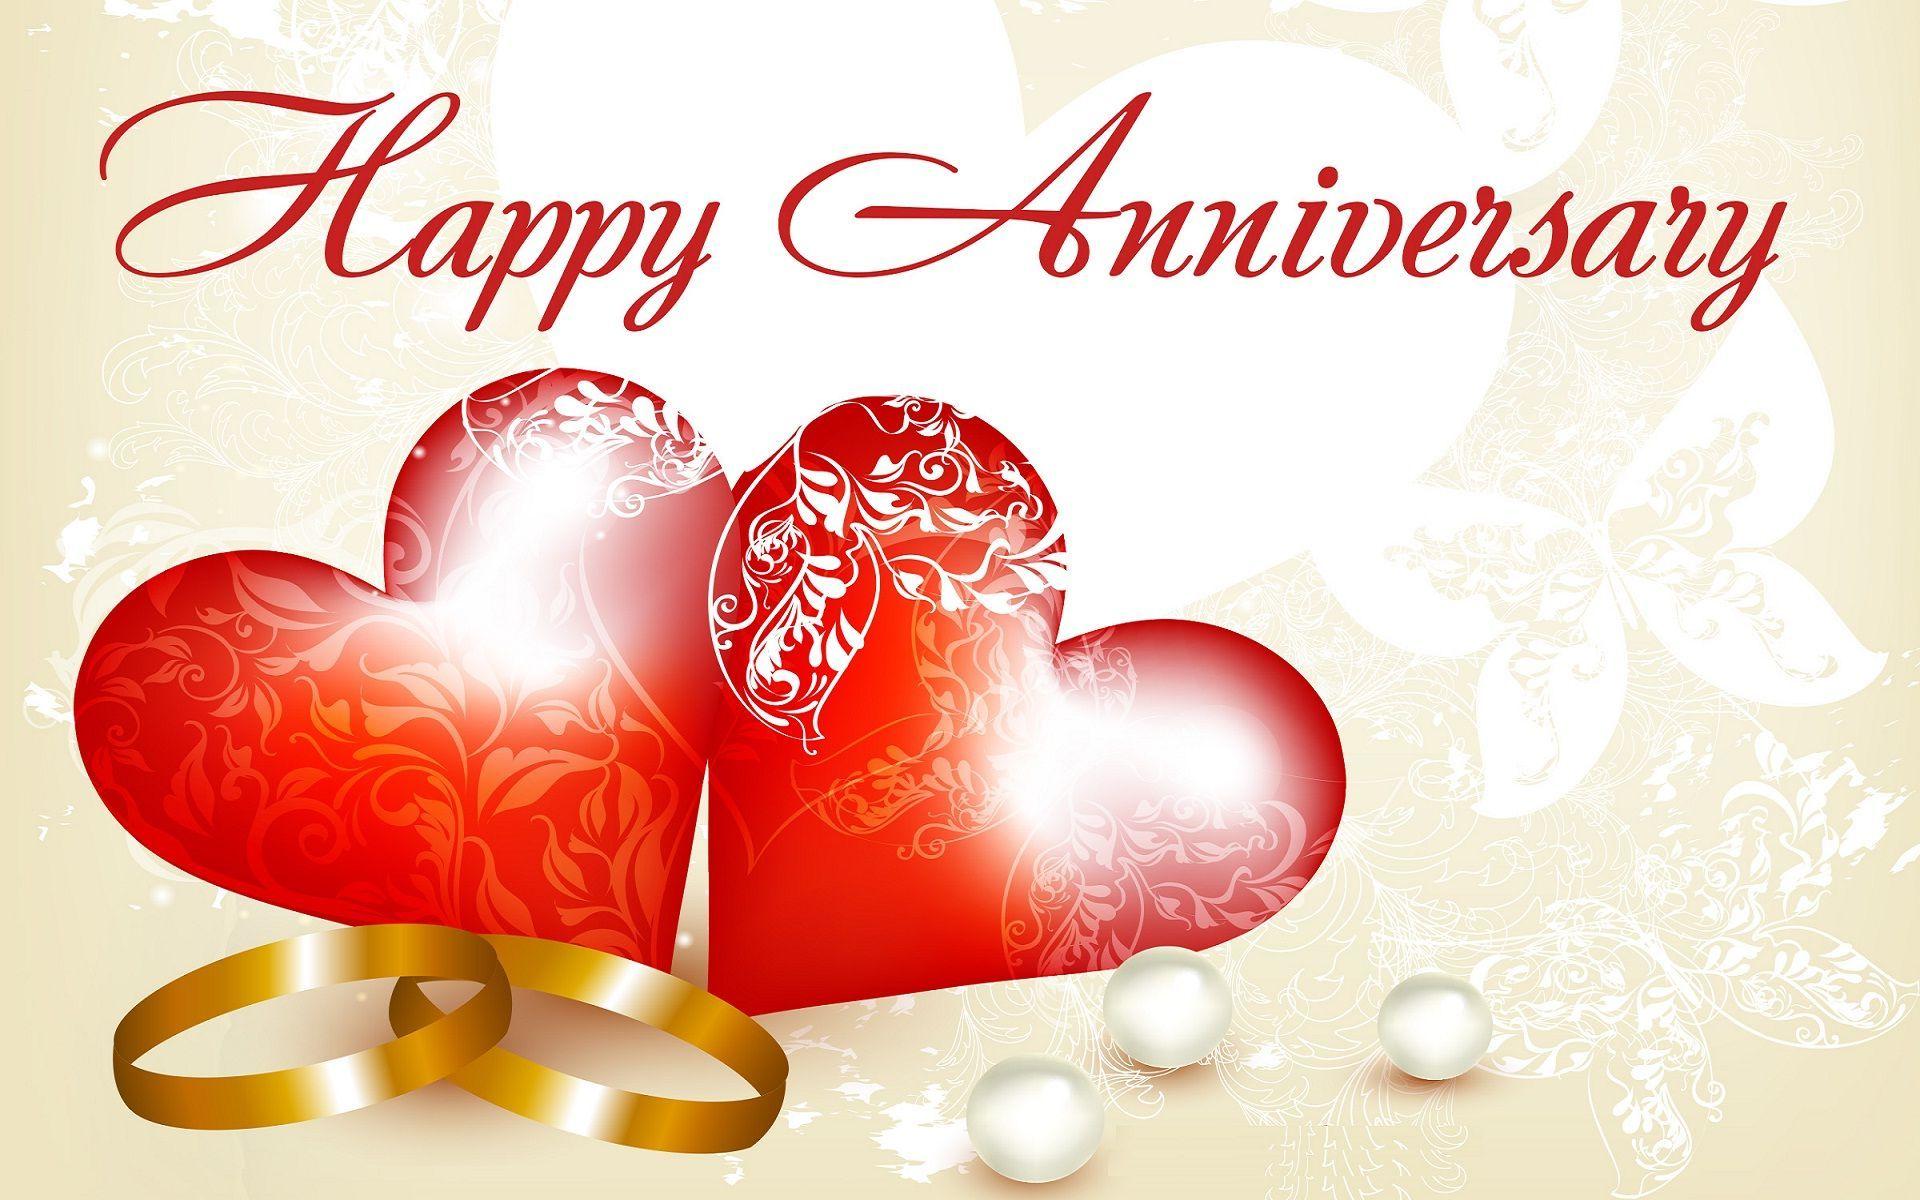 Happy Anniversary Wallpapers - Tattoo Ideas For Women